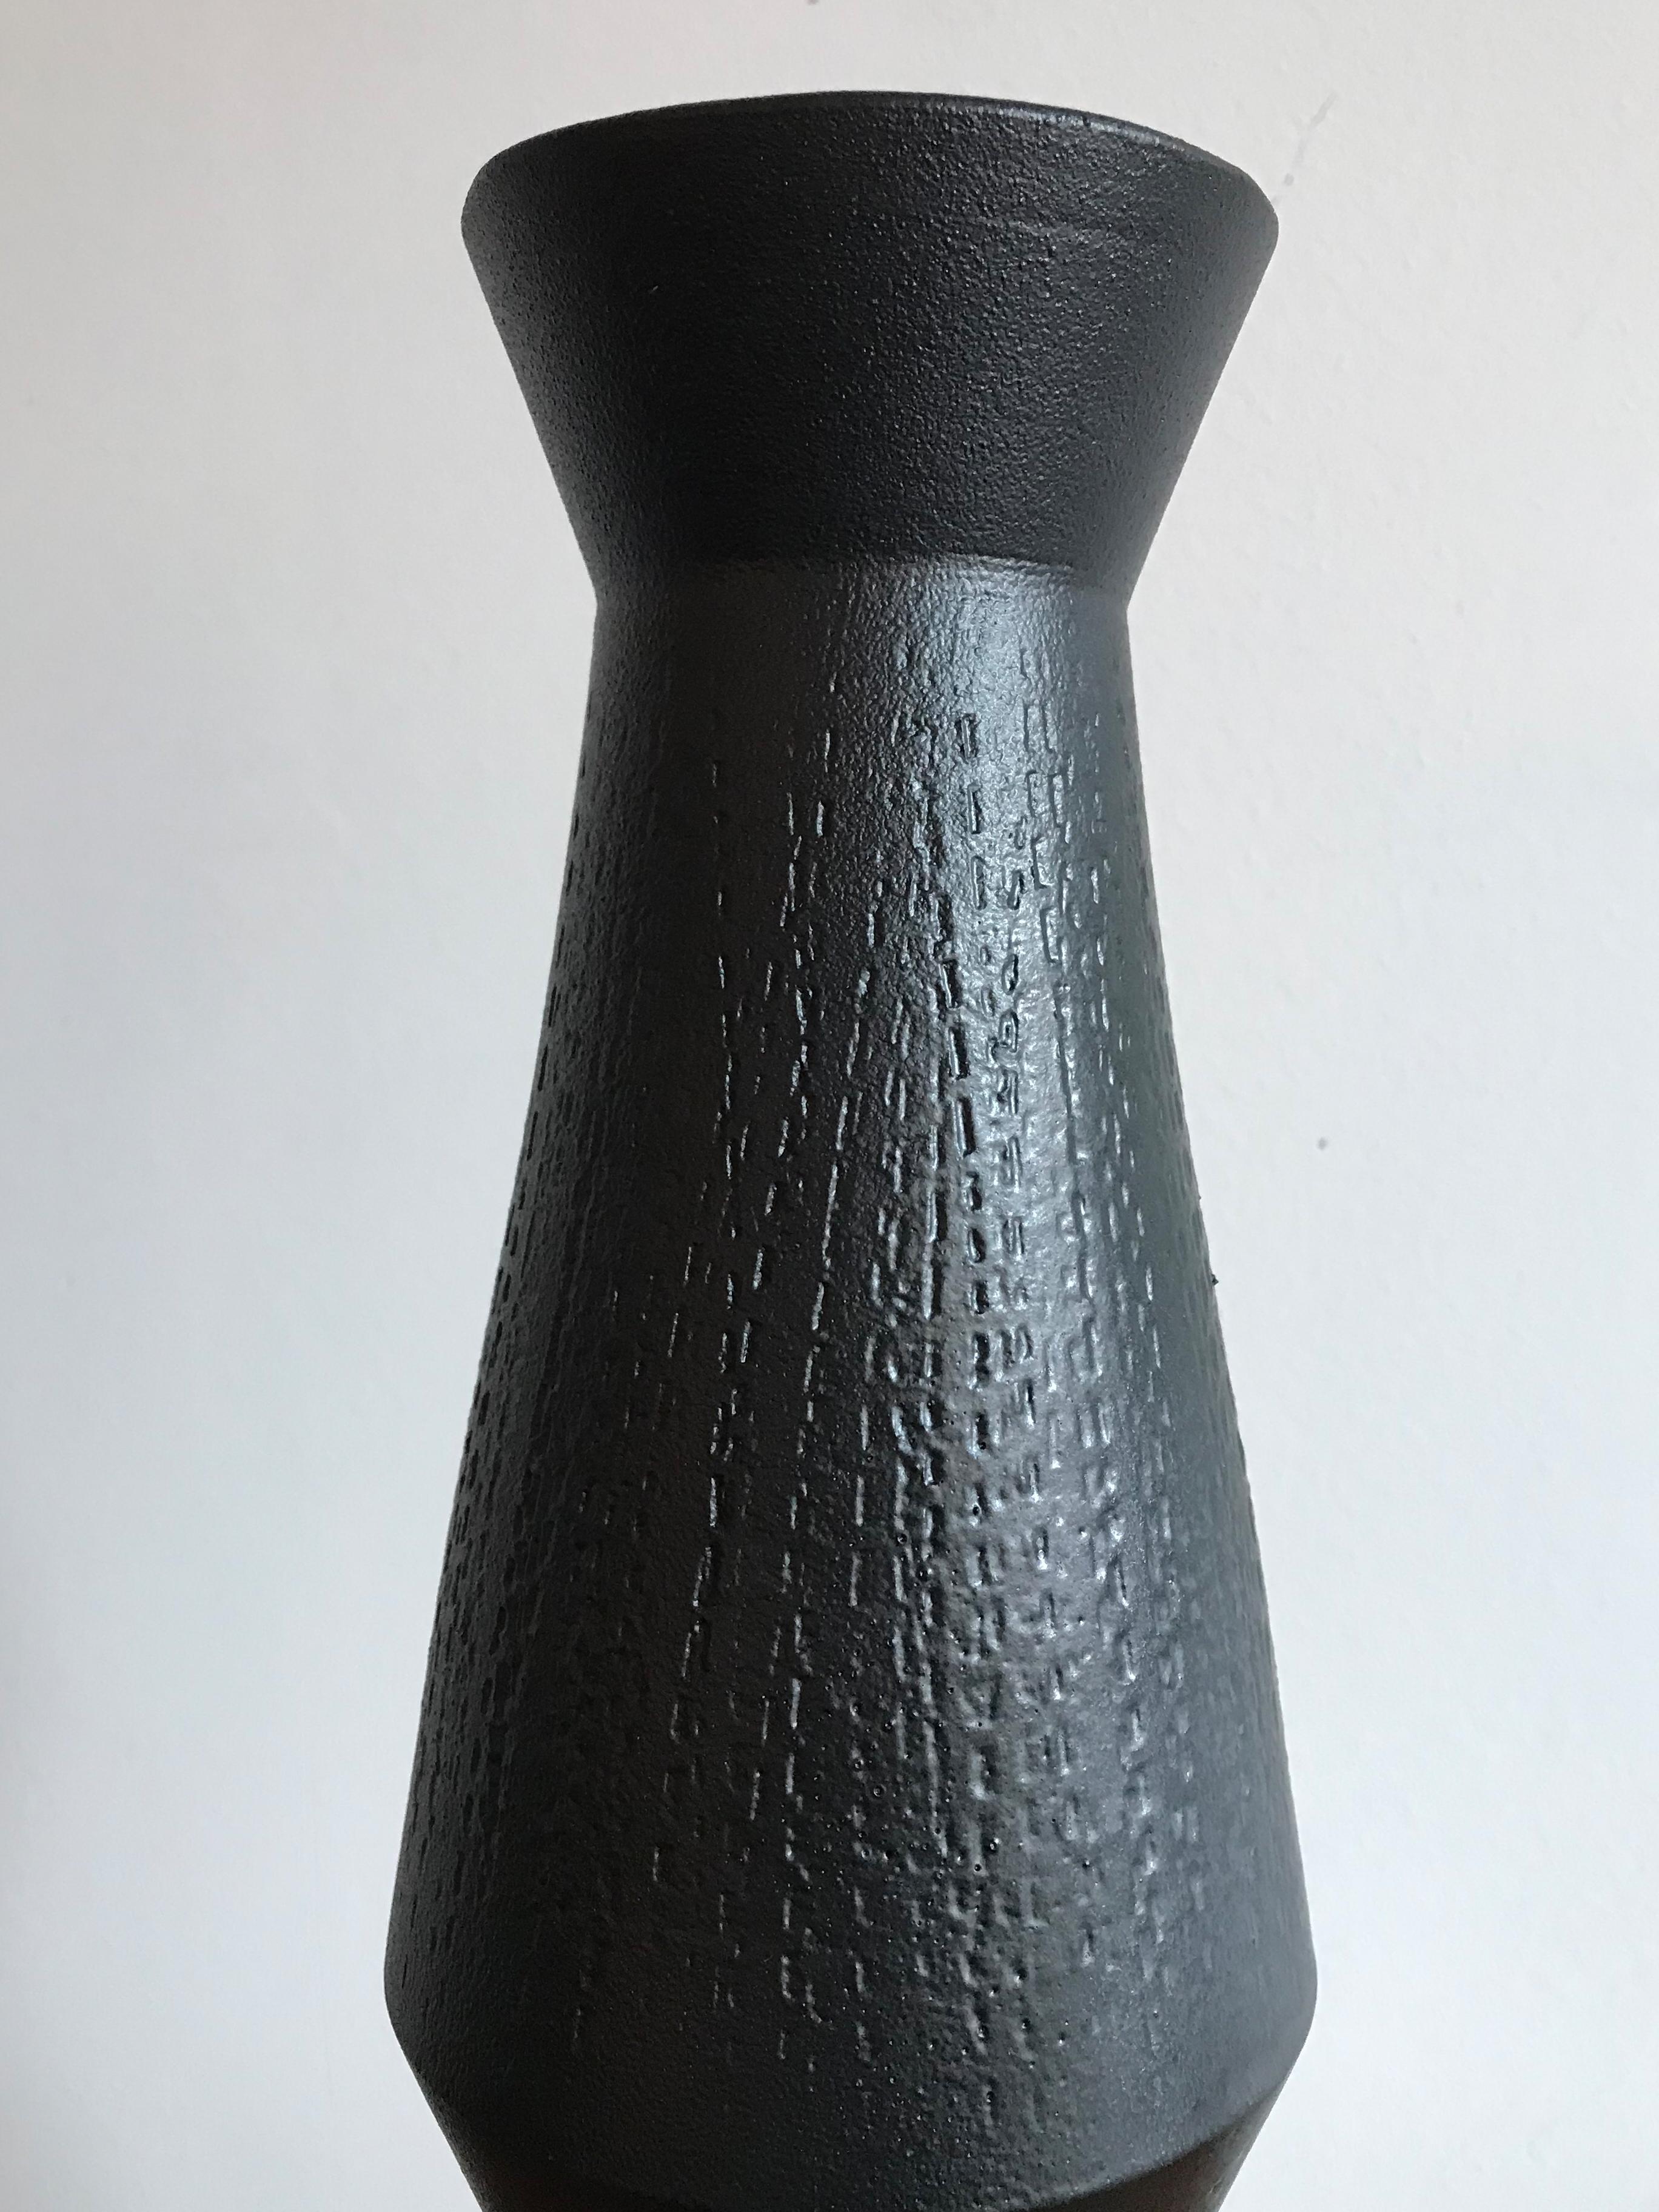 Painted Contemporary Ceramic Vase Designed by Capperidicasa, Made in Italy